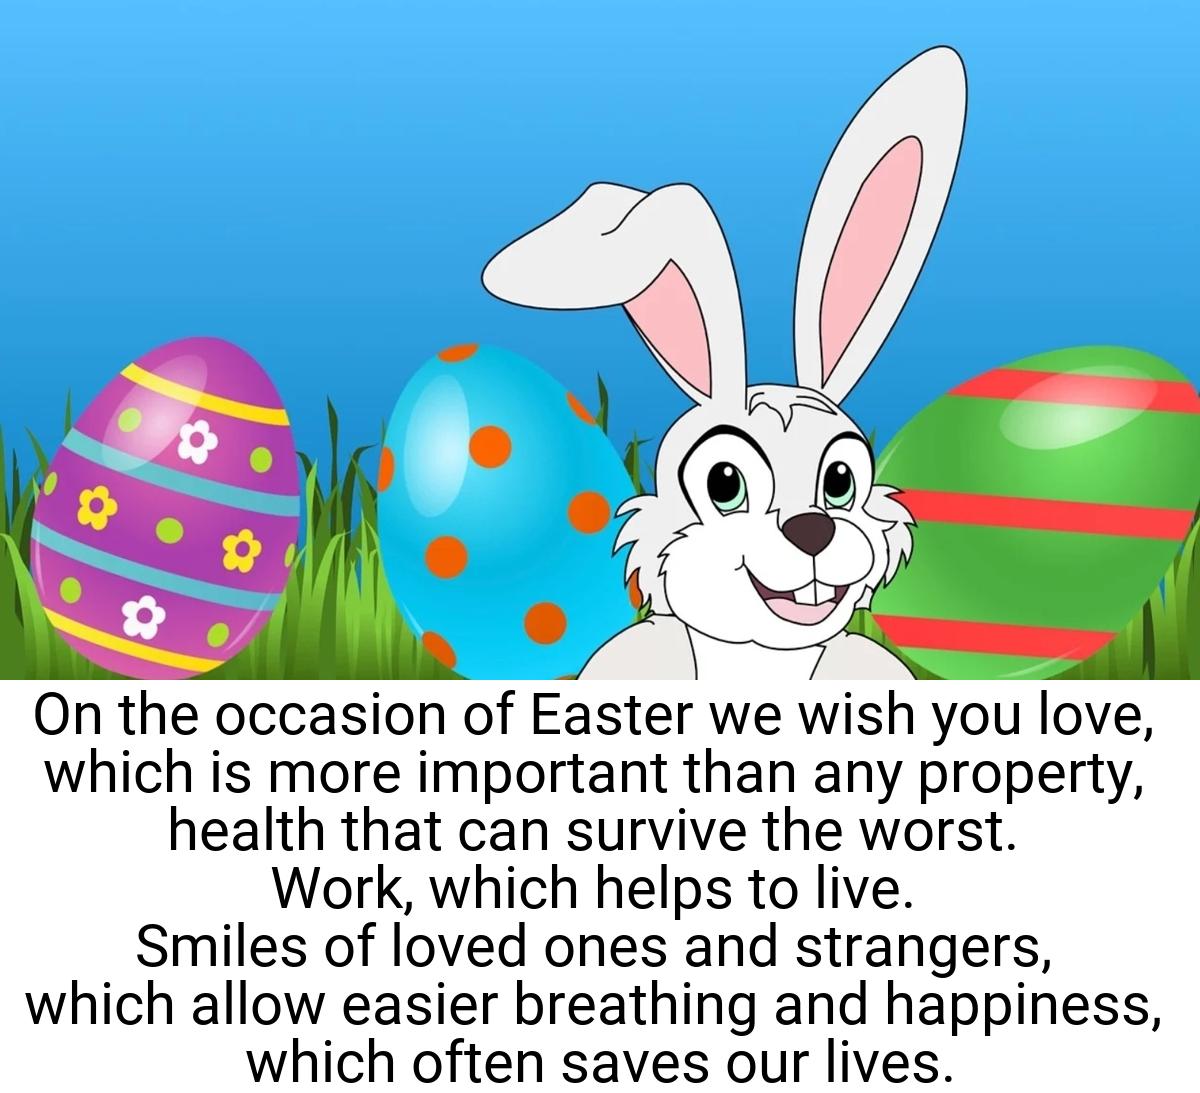 On the occasion of Easter we wish you love, which is more